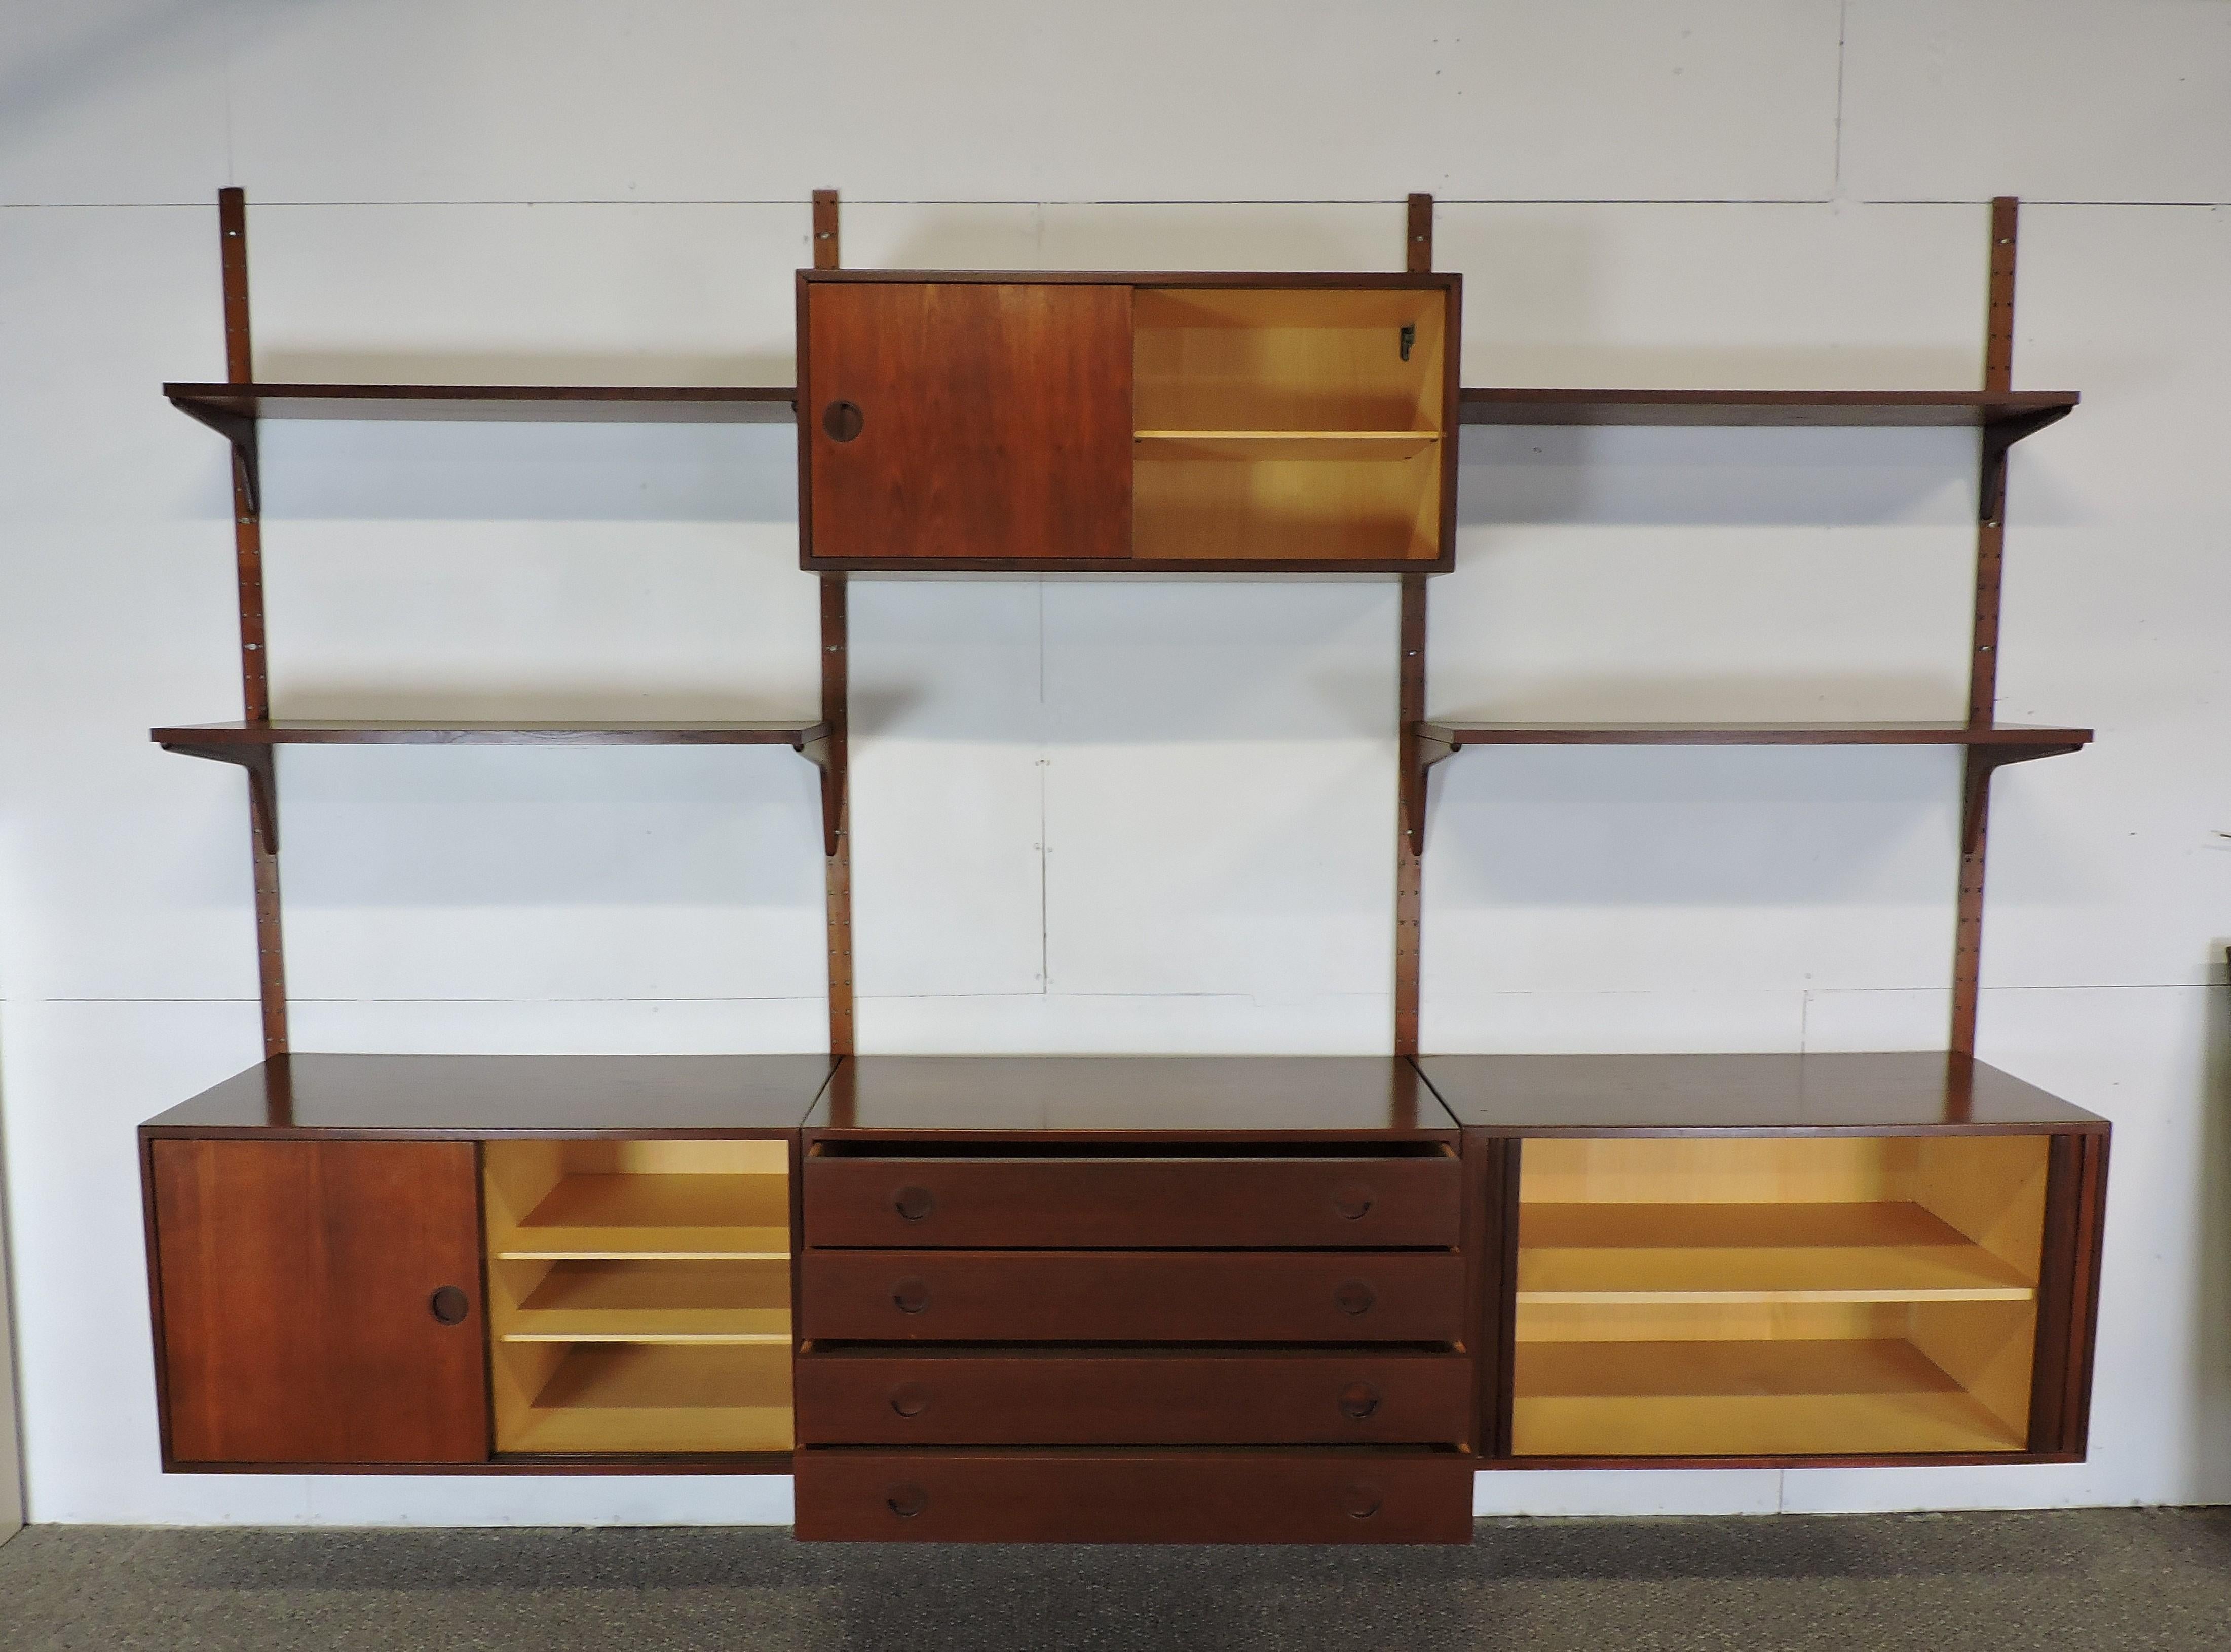 Large three bay modular wall unit designed by Rud Thygesen and Johnny Sorensen and made in Denmark by Hansen and Guldborg. This unit includes four poles, four modules and four shelves. Two of the cabinets have sliding doors with adjustable shelves,